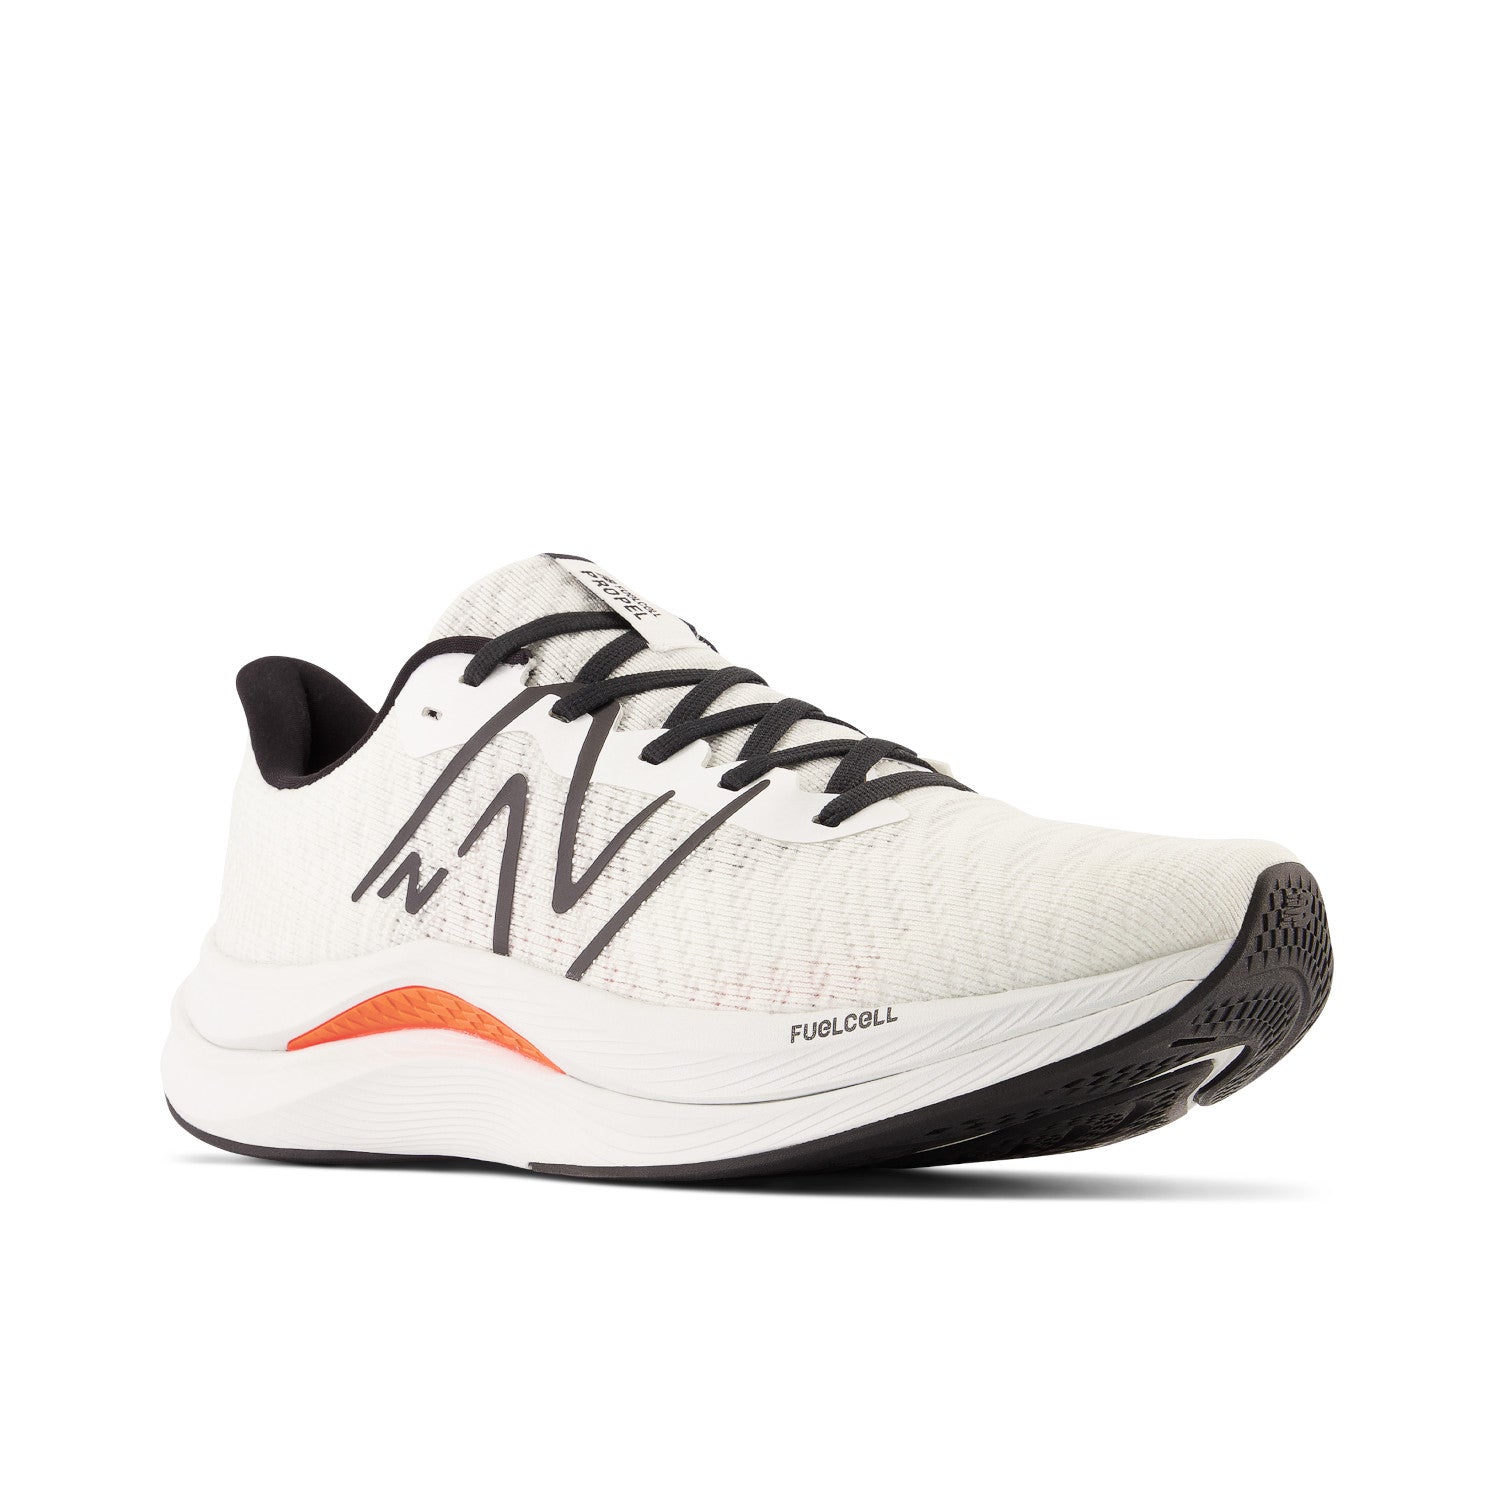 New Balance FuelCell Propel v4 MFCPRLW4 Men's2